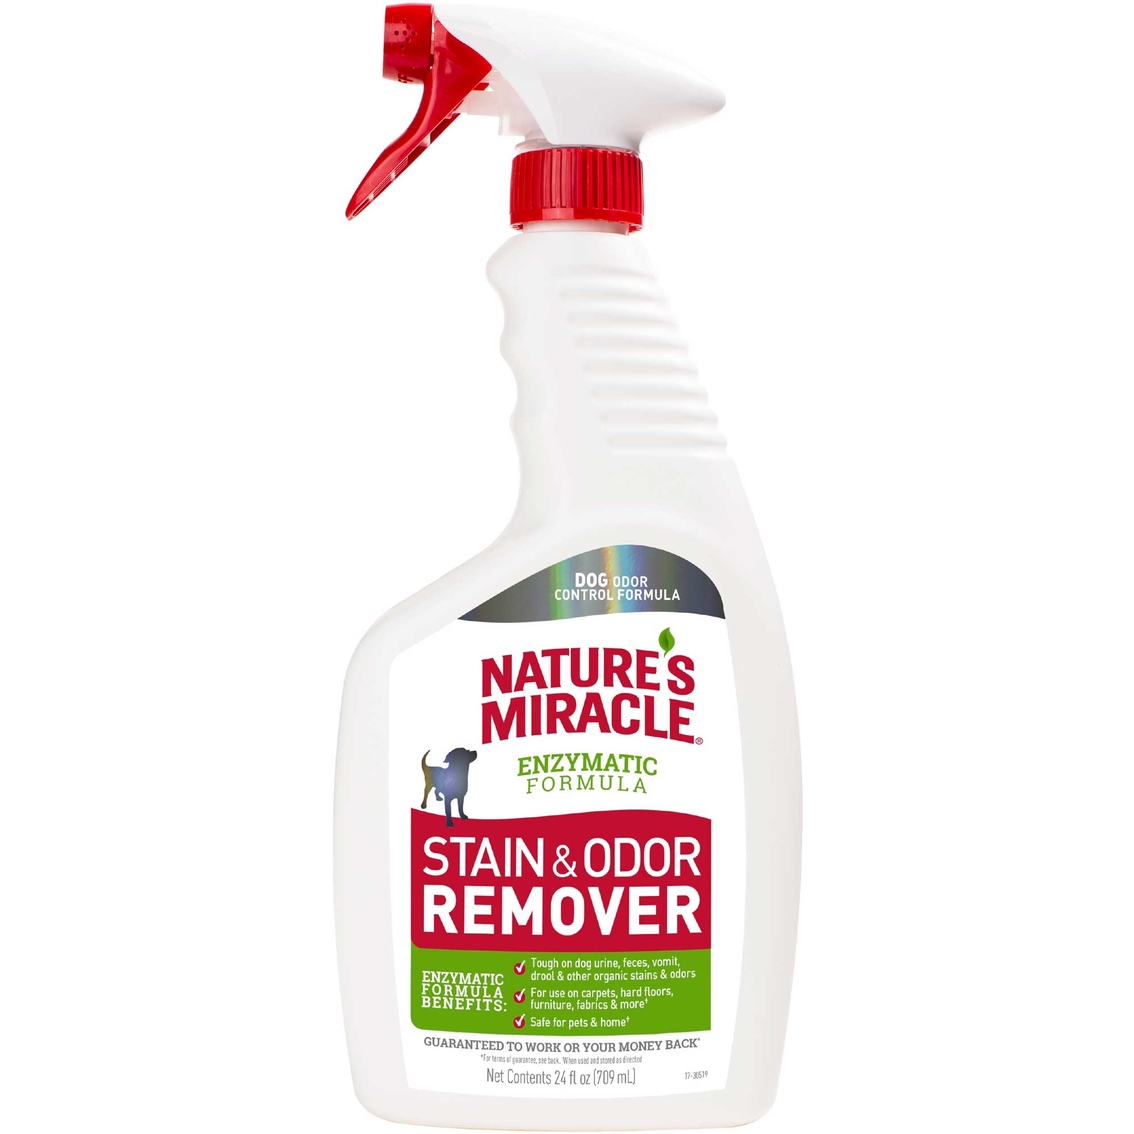 Spectrum Diversified Natures Miracle Stain and Odor Remover Trigger Spray